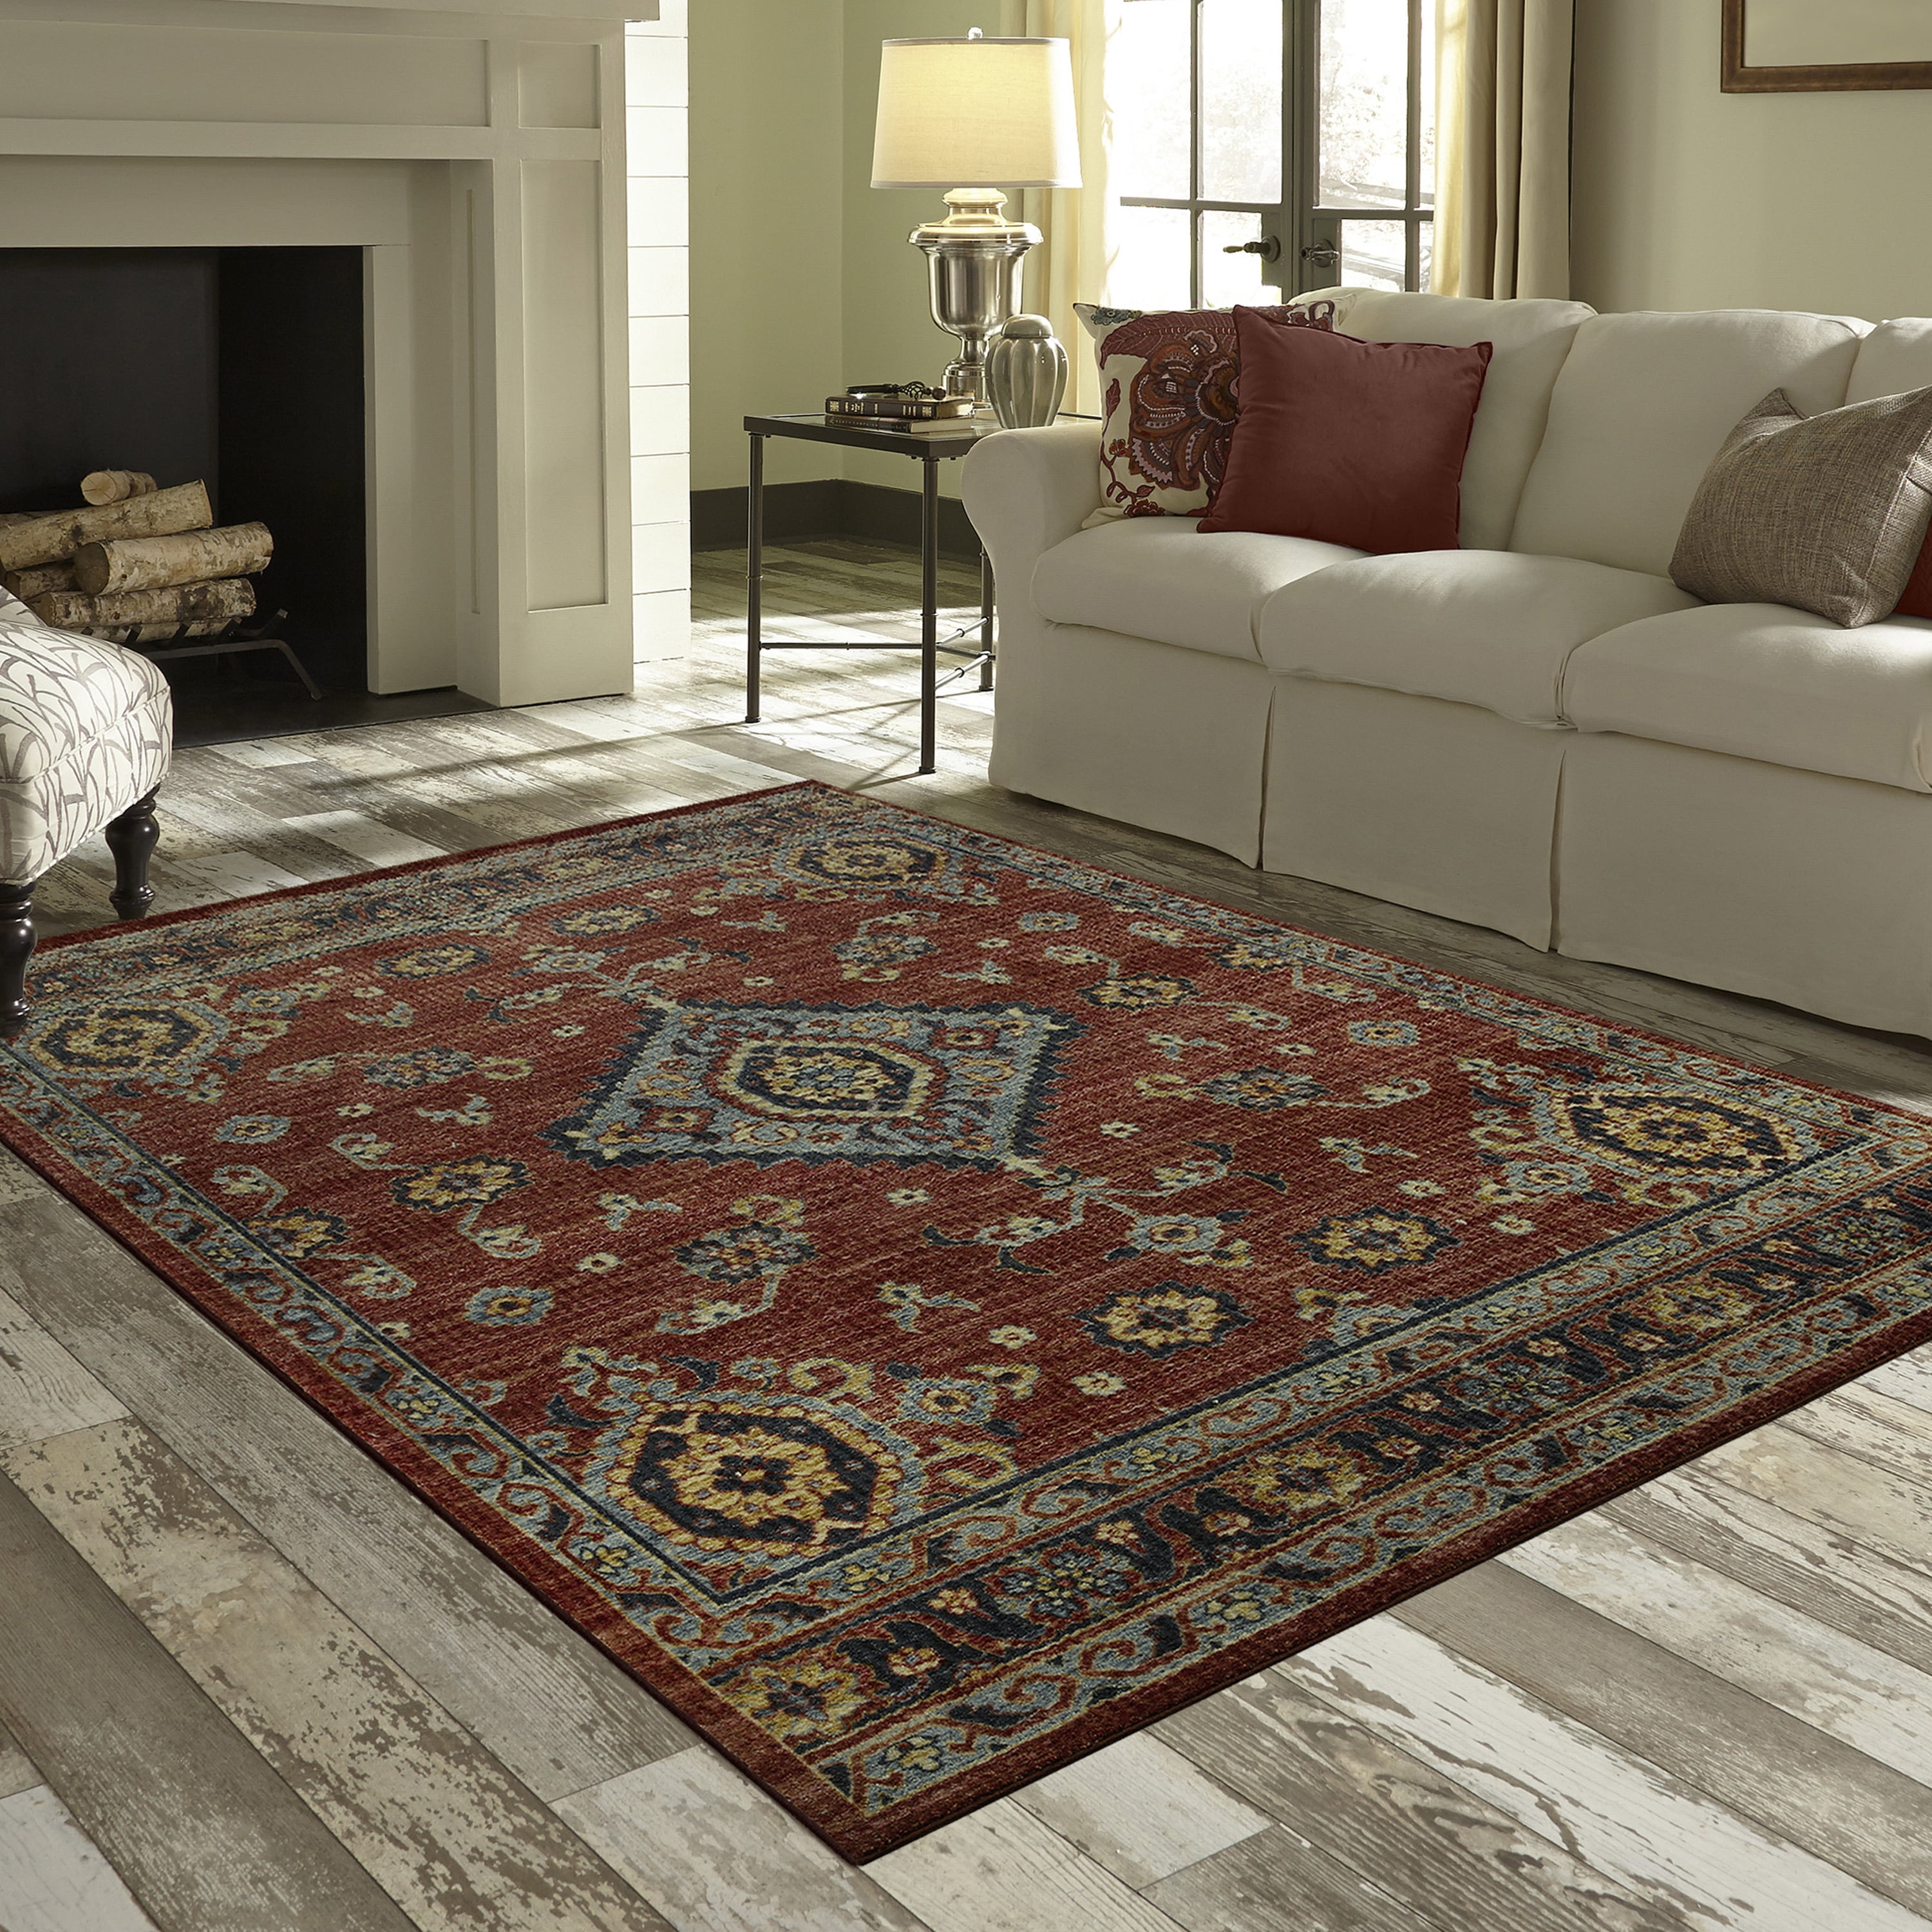 Rugs Area Washable Runner Area Rugs With Modern Southwestern